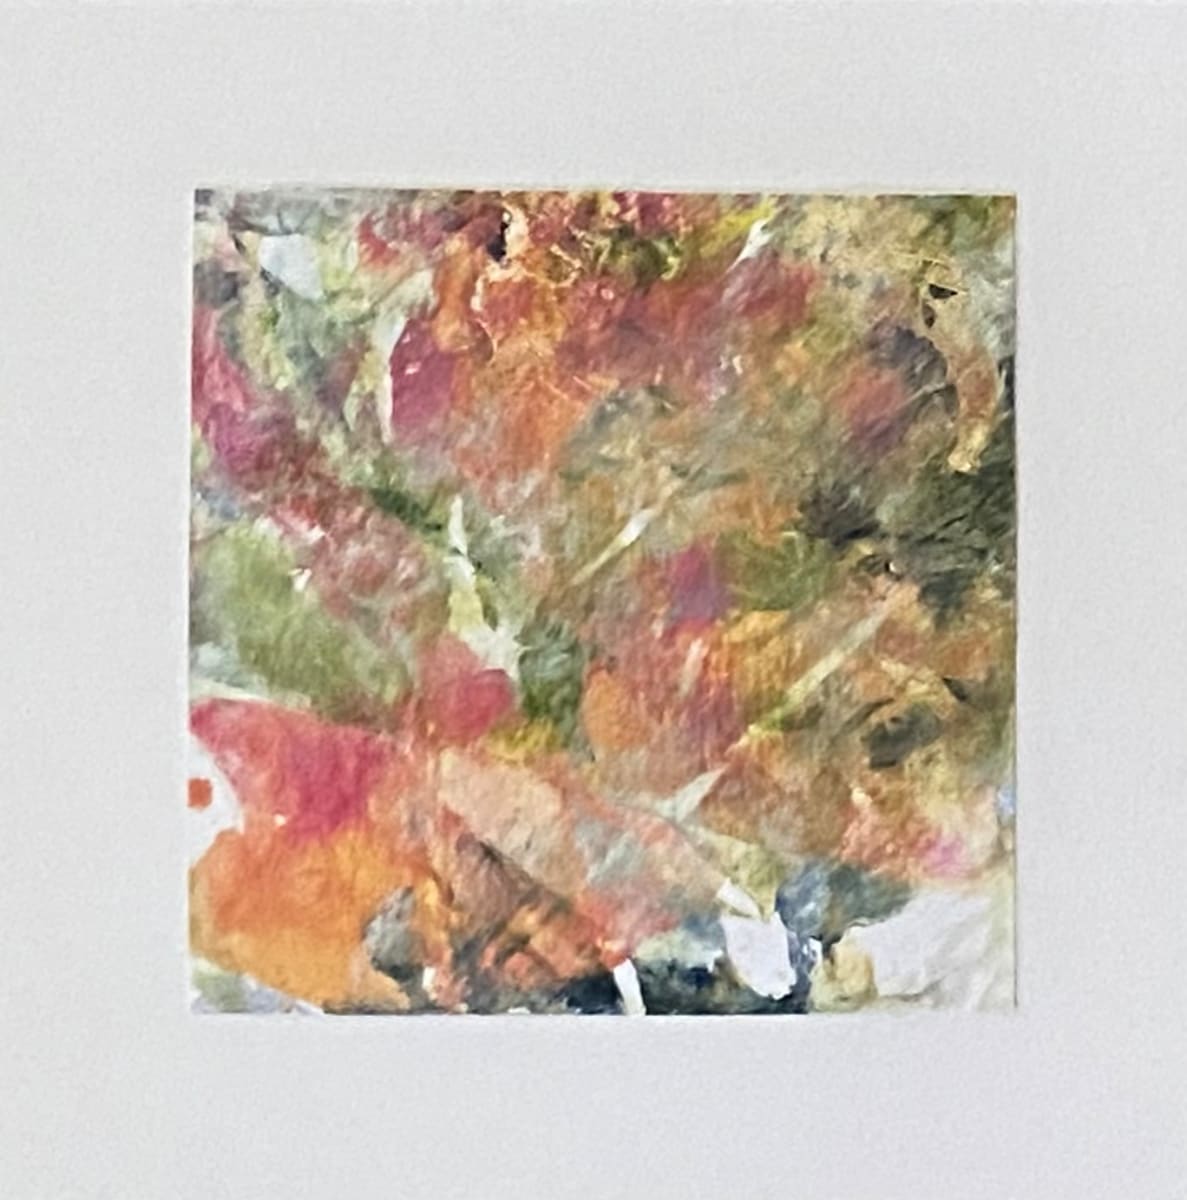 7-Mini collage 77, mixed media on paper, 4 x 4 inches, Unframed 